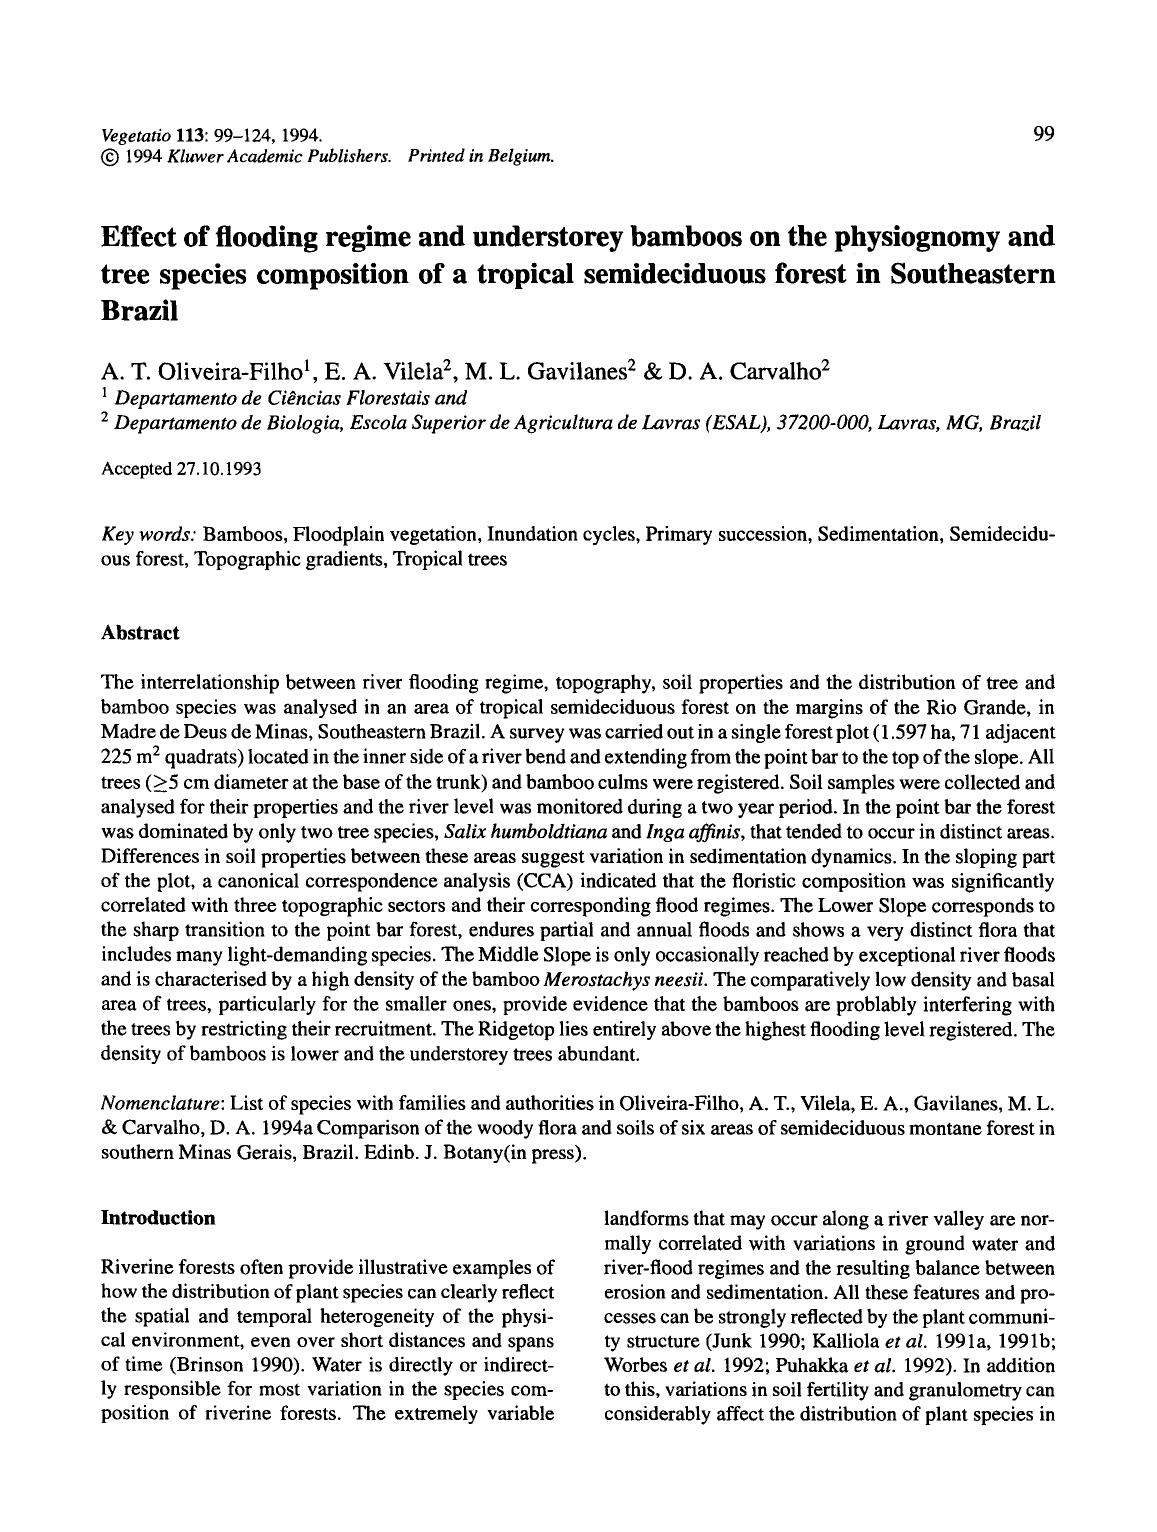 Effect of flooding regime and understorey bamboos on the physiognomy and tree species composition of a tropical semideciduous forest in Southeastern Brazil by Unknown